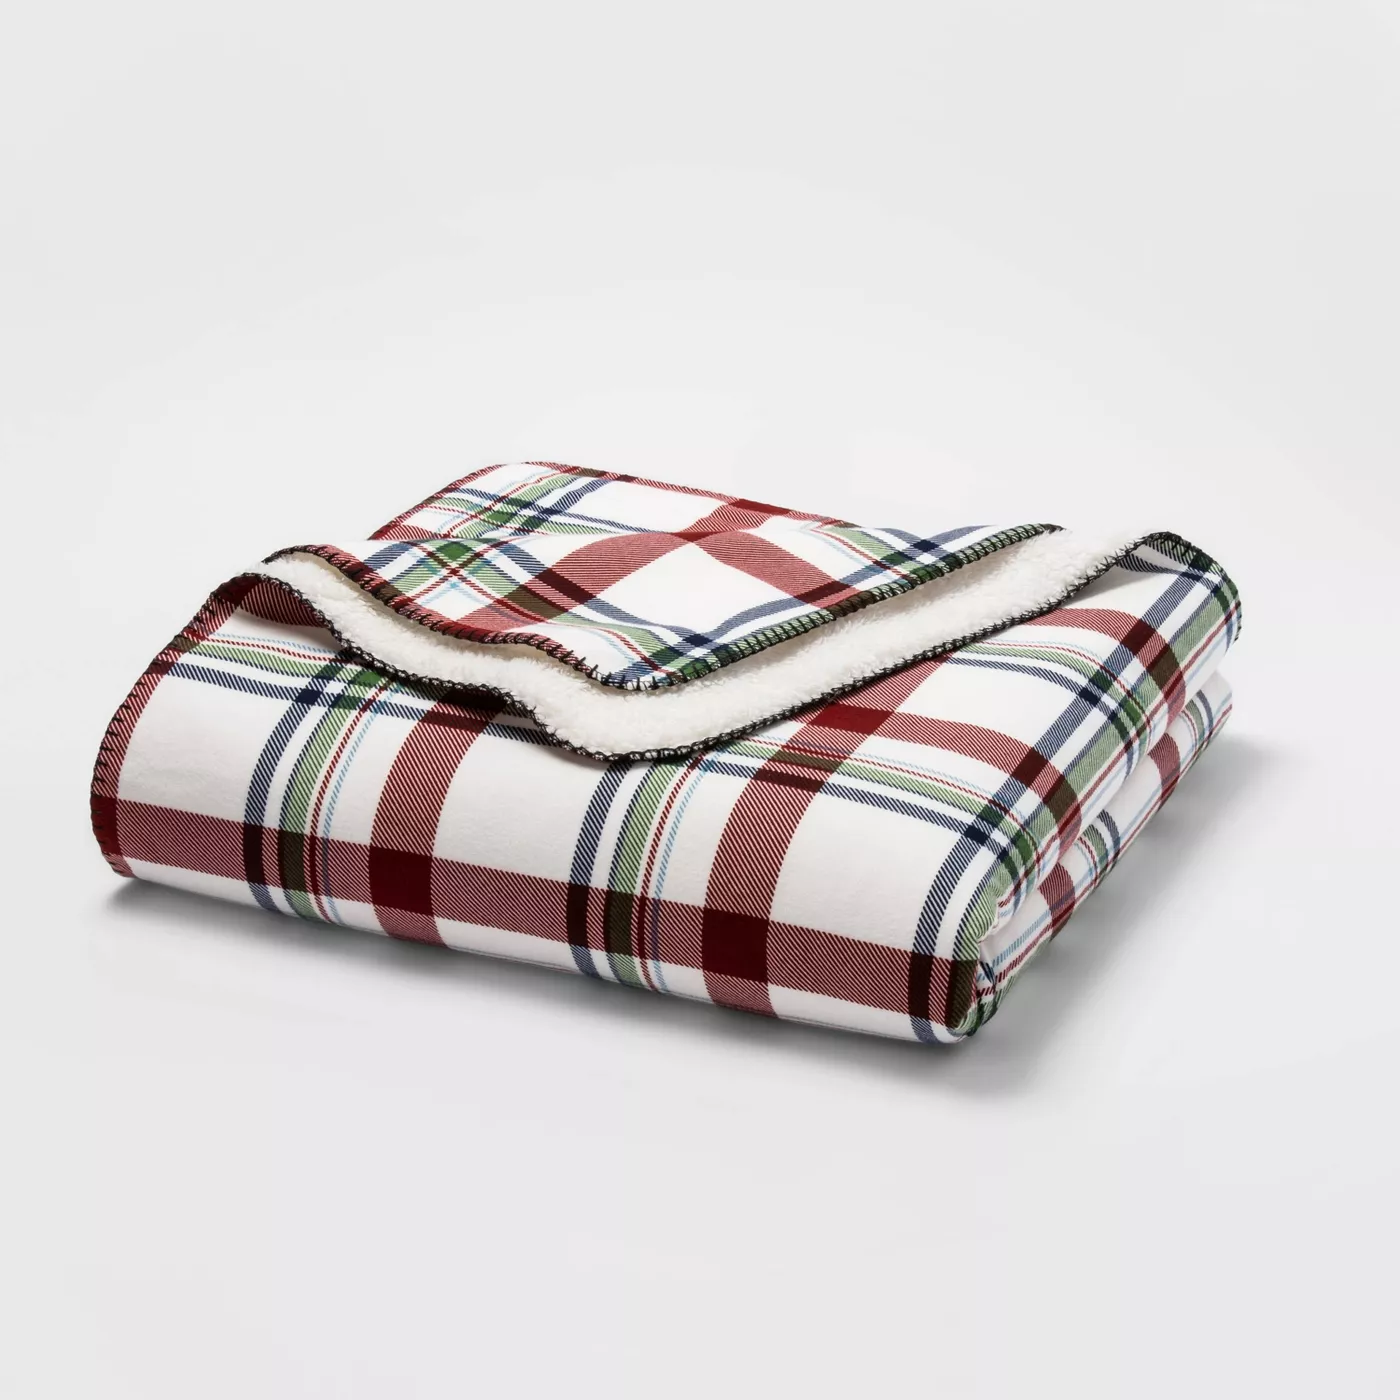 Flannel & Sherpa Bed Blanket - Threshold™ - image 1 of 4